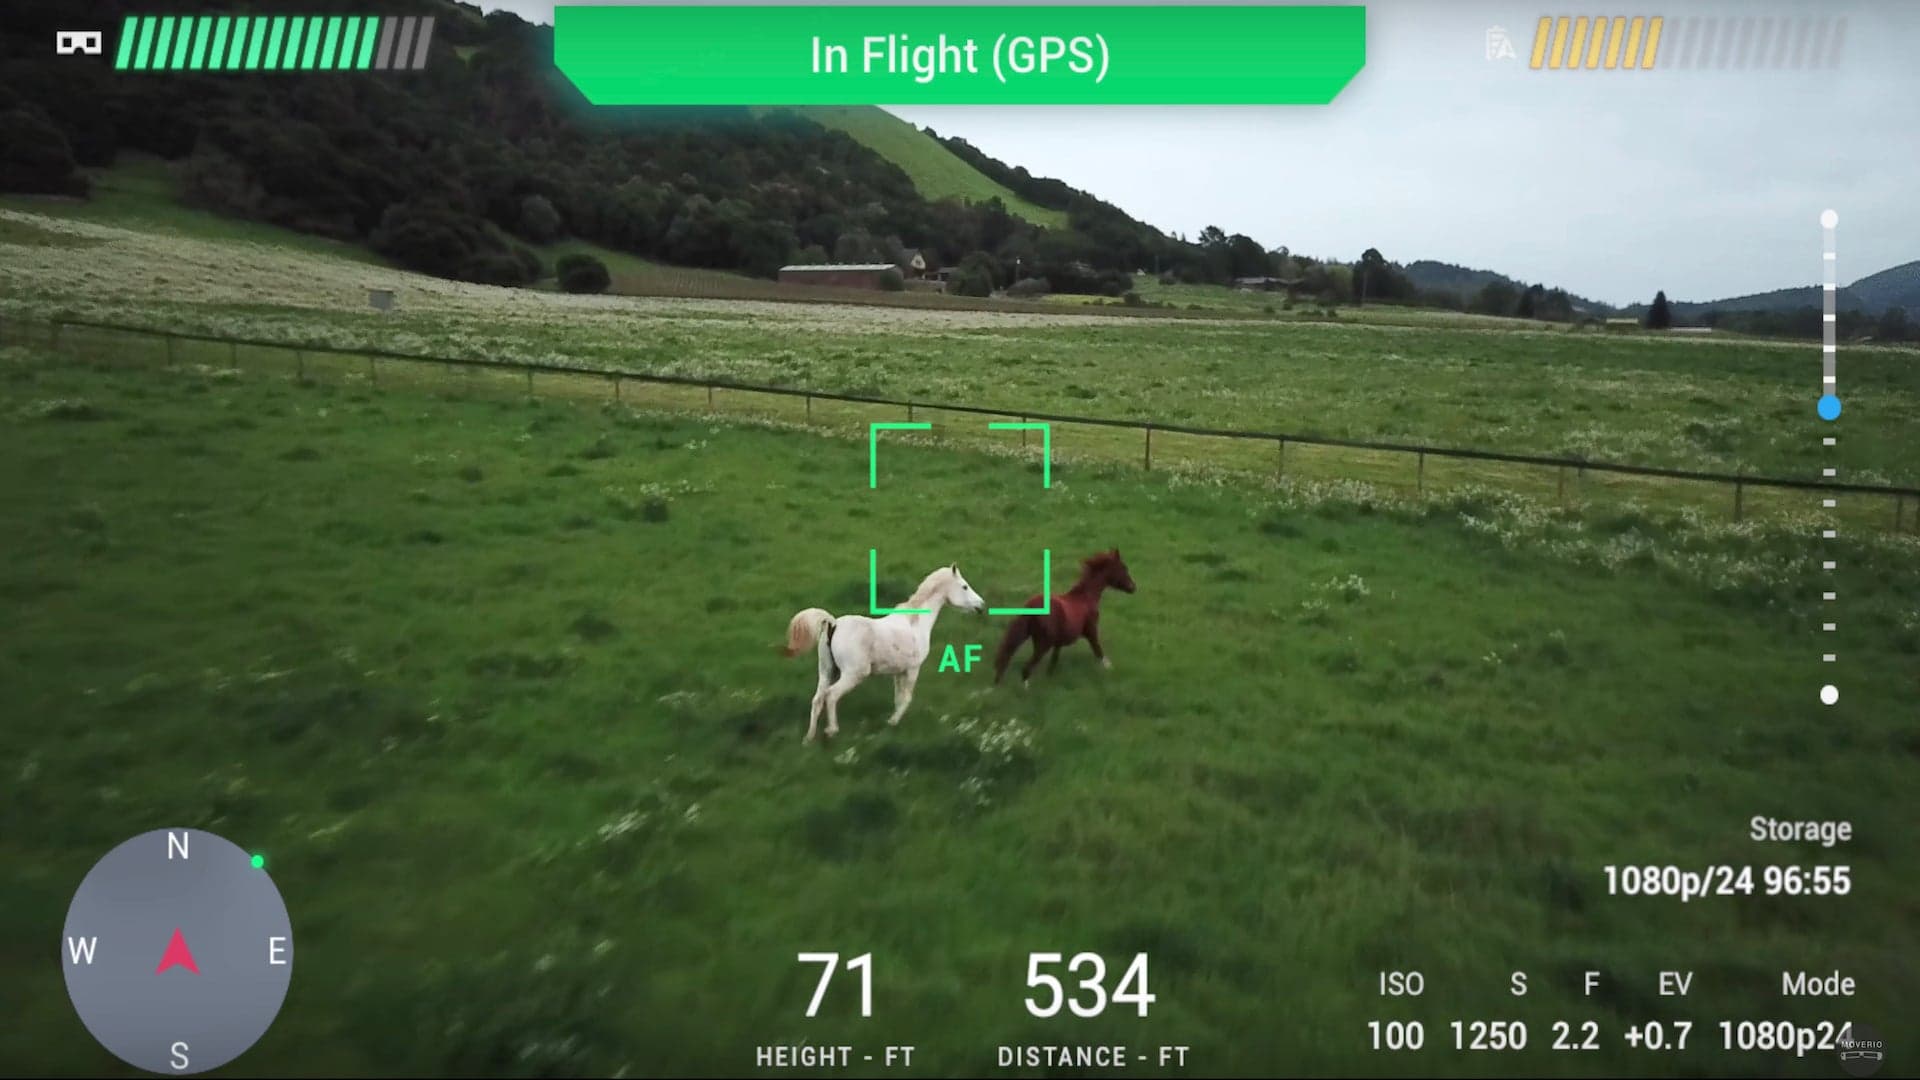 Epson Drone Soar App Provides Augmented Reality Head-Up Display for Moverio Smart Glasses